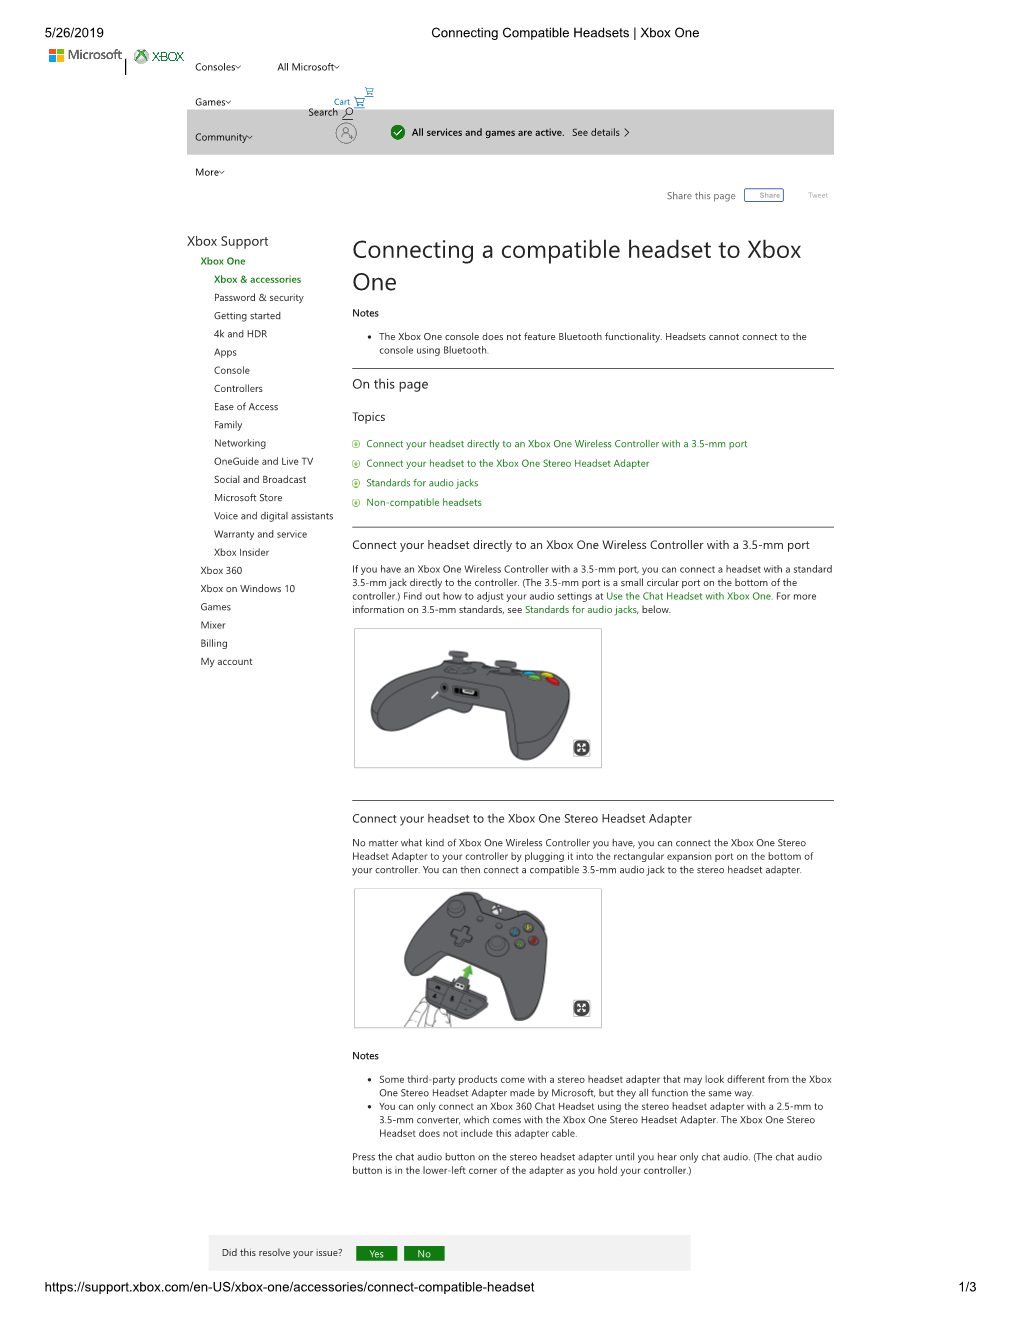 Connecting a Compatible Headset to Xbox Xbox & Accessories One Password & Security Getting Started Notes